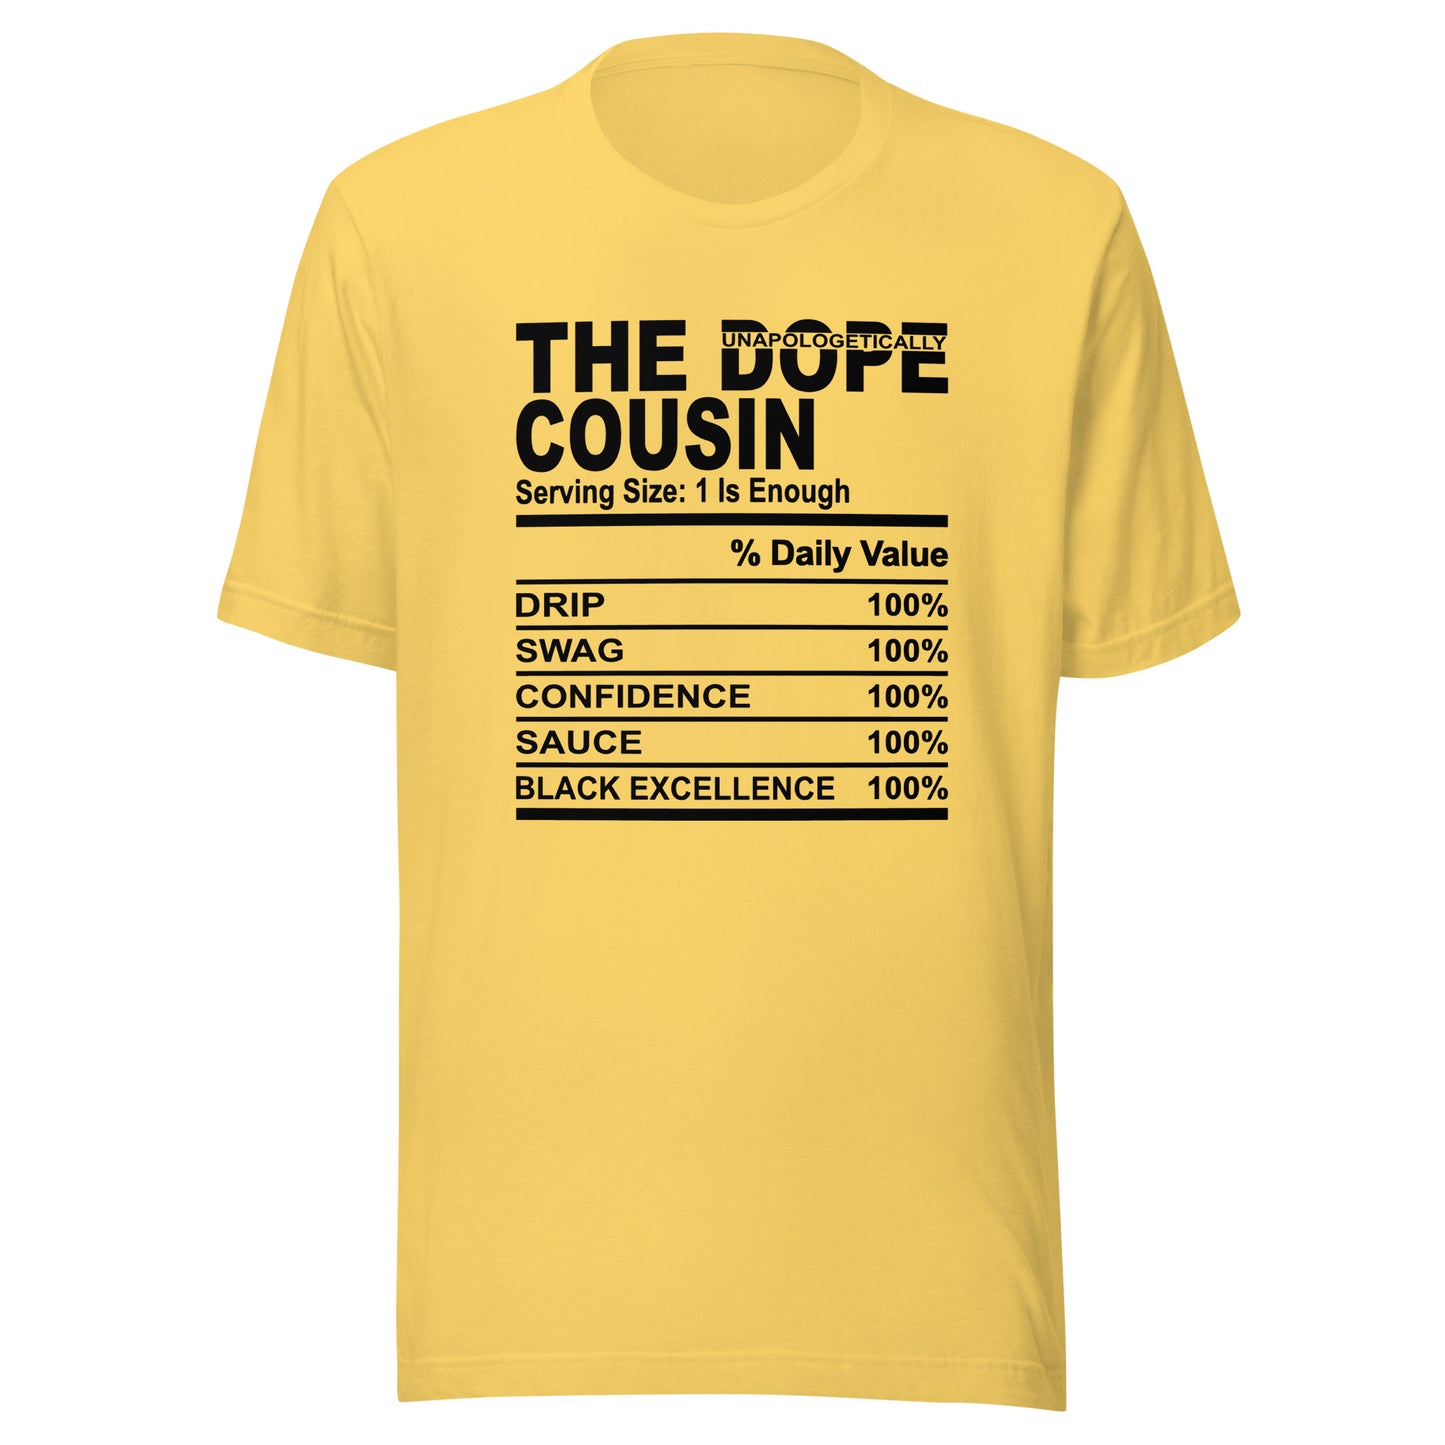 THE DOPE COUSIN (Unapologetically)- 2XL-3XL - Unisex T-Shirt (black print)